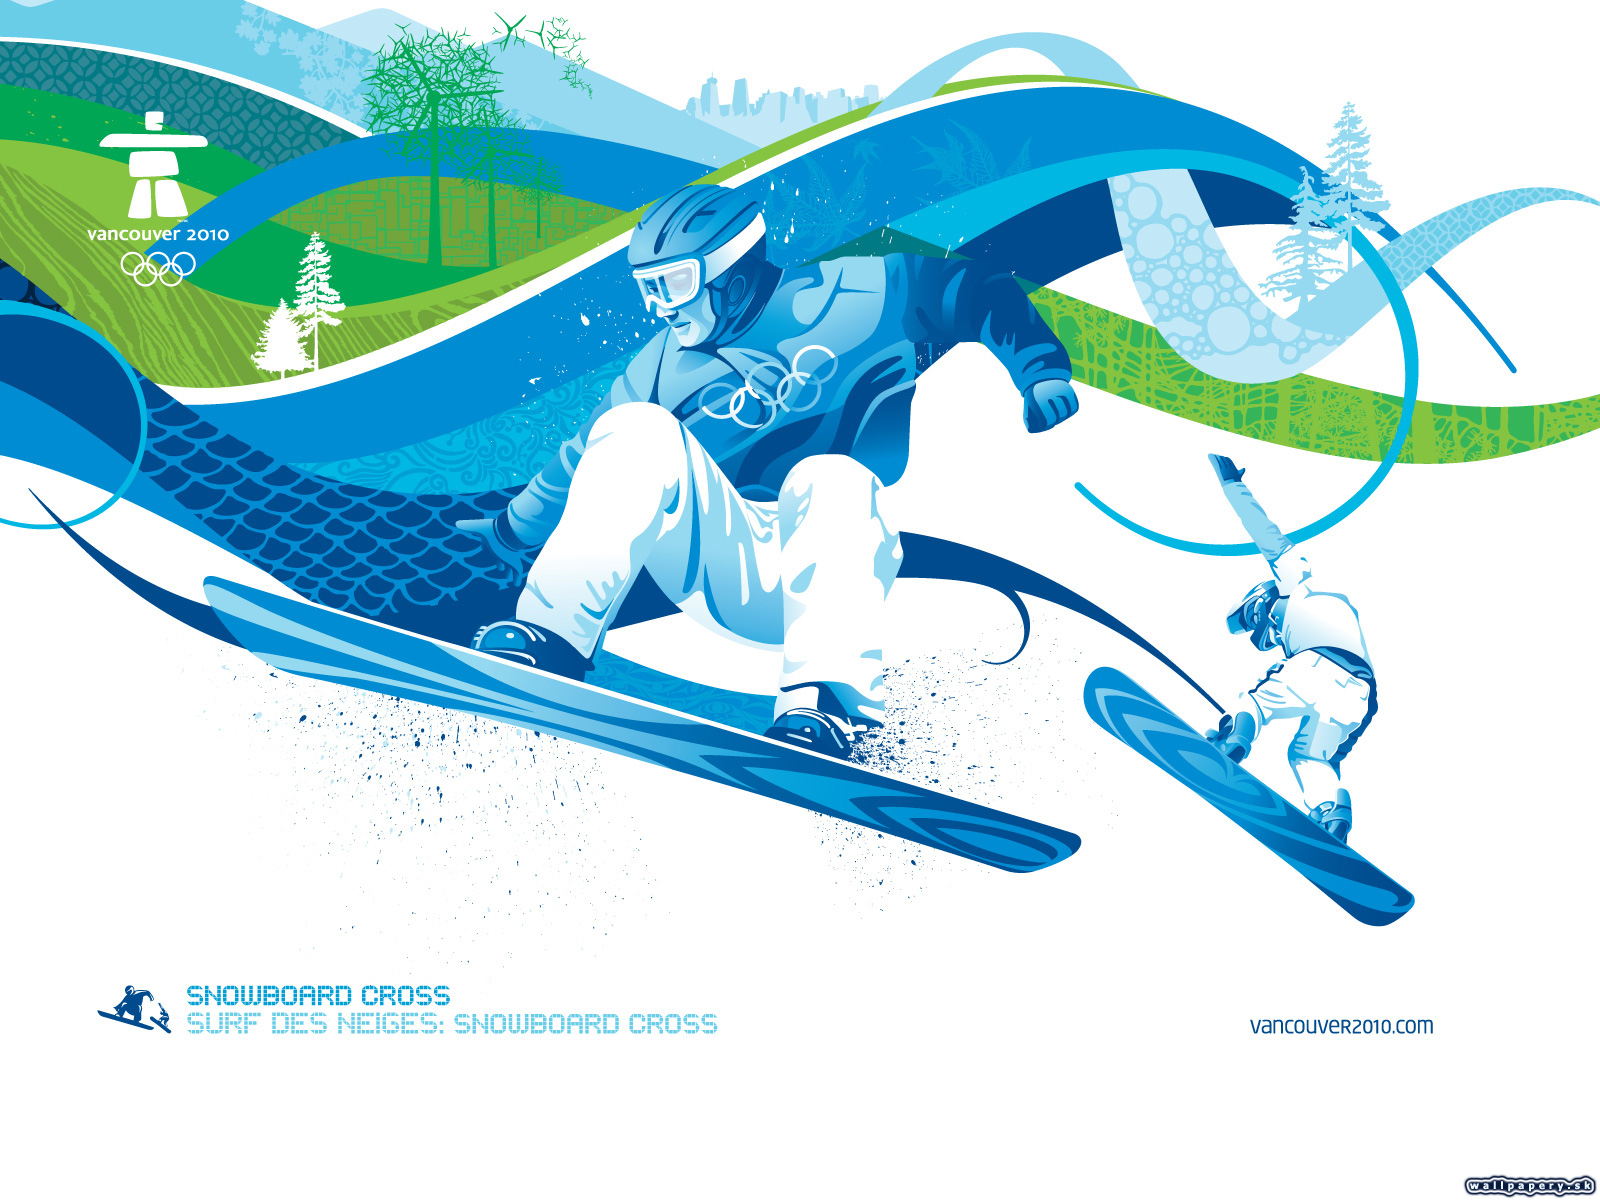 Vancouver 2010 - The Official Video Game of the Olympic Winter Games - wallpaper 9